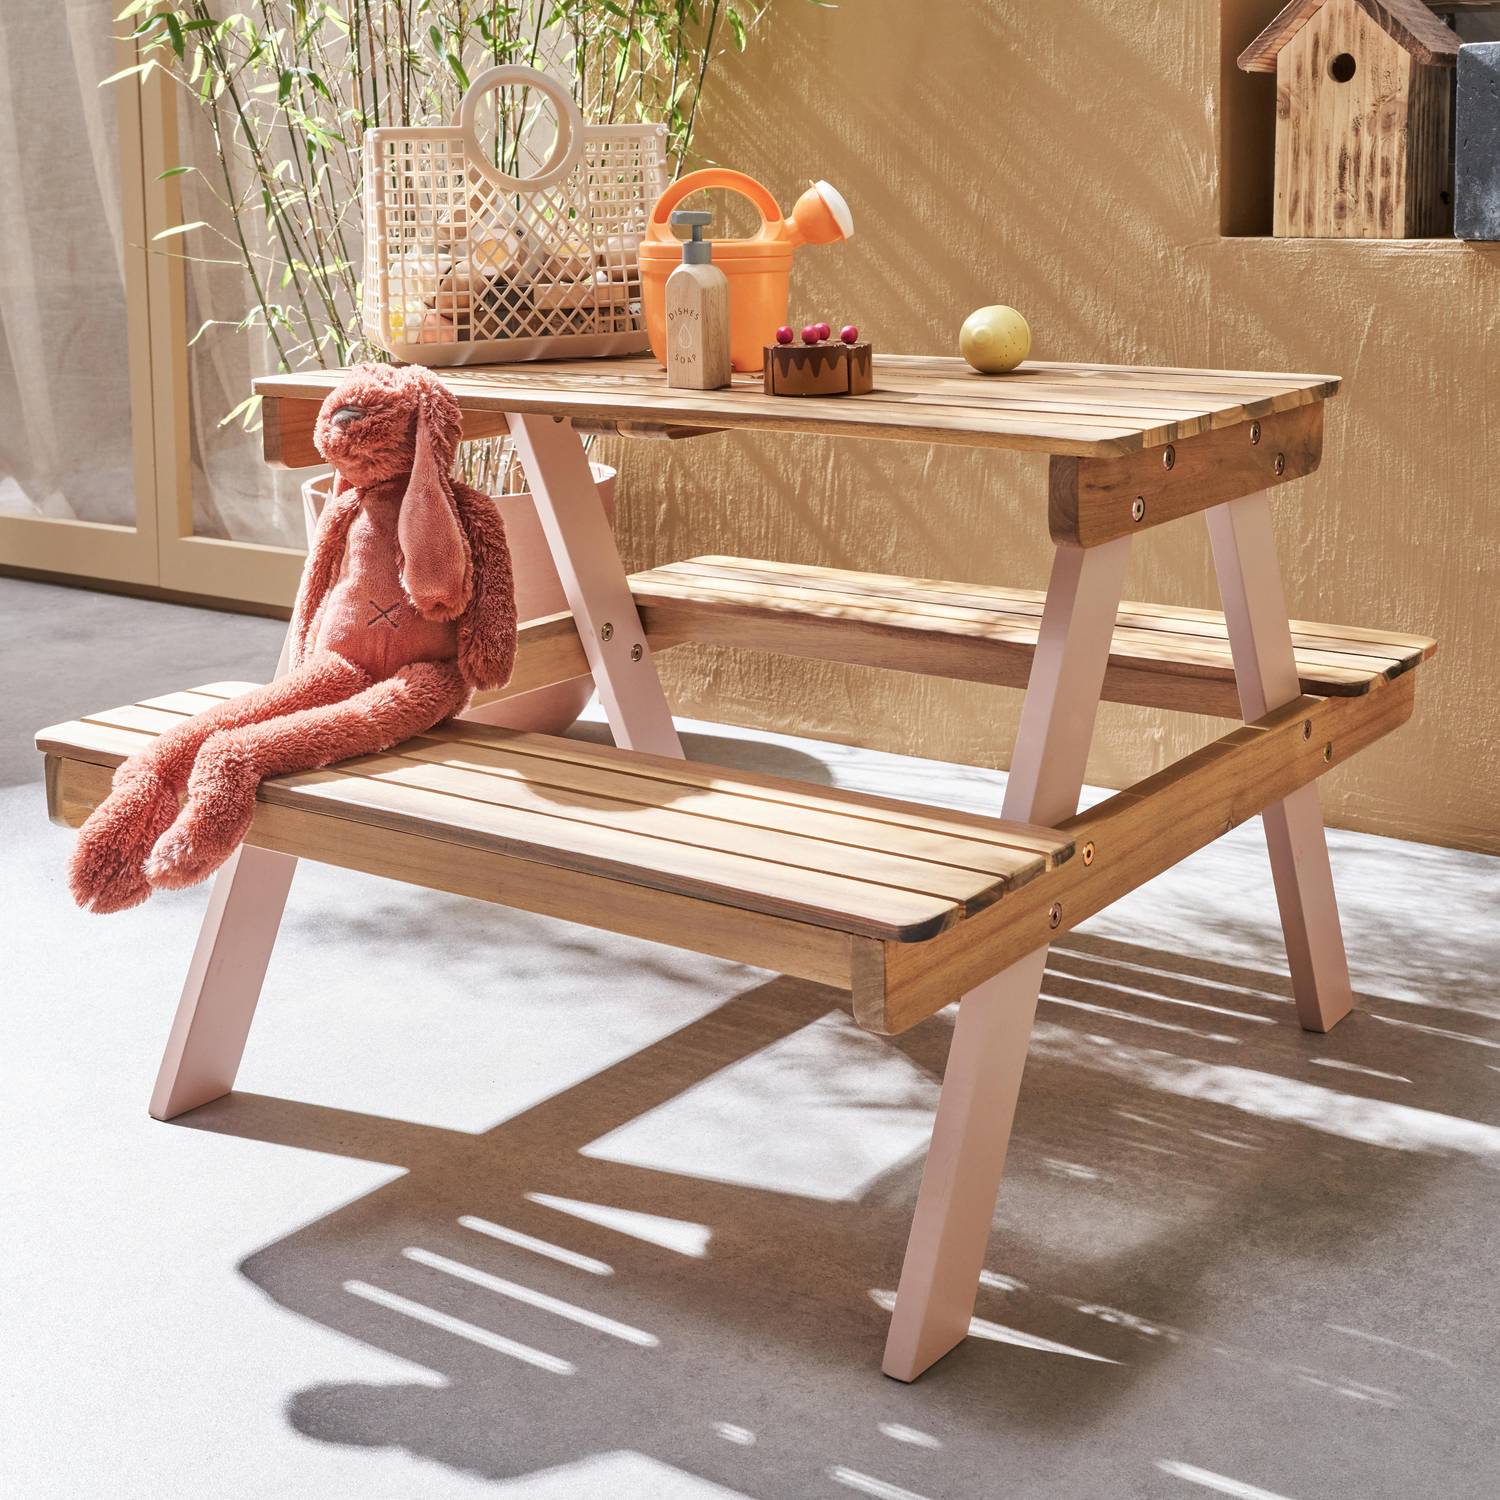 Acacia wood picnic table for children, 2 places, light teak and pink colour Photo2